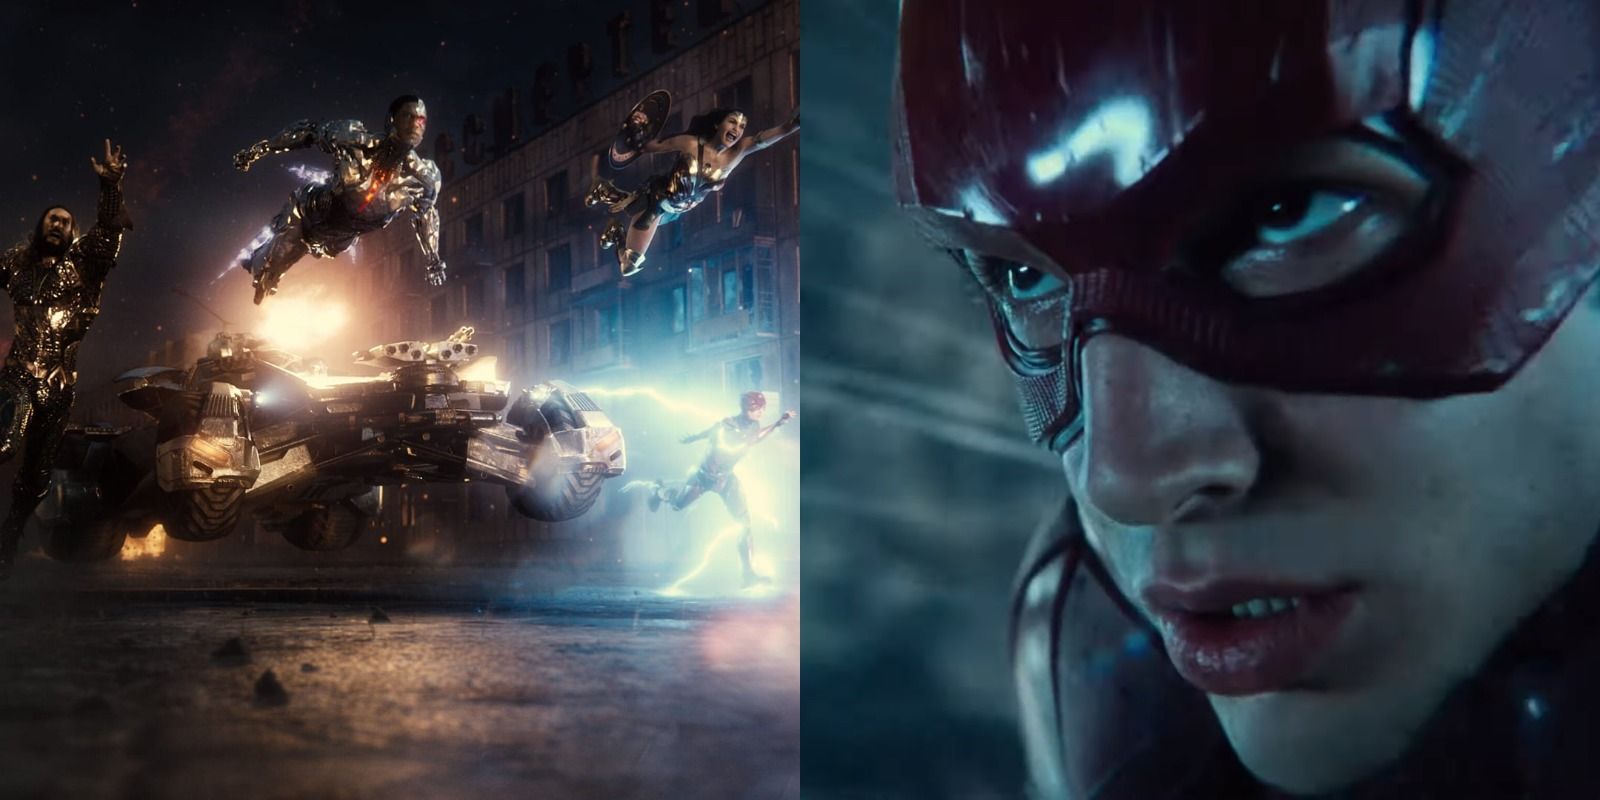 Zack Snyder's Justice League split image. The left shows the League in action and the right shows a close up of Barry Allen